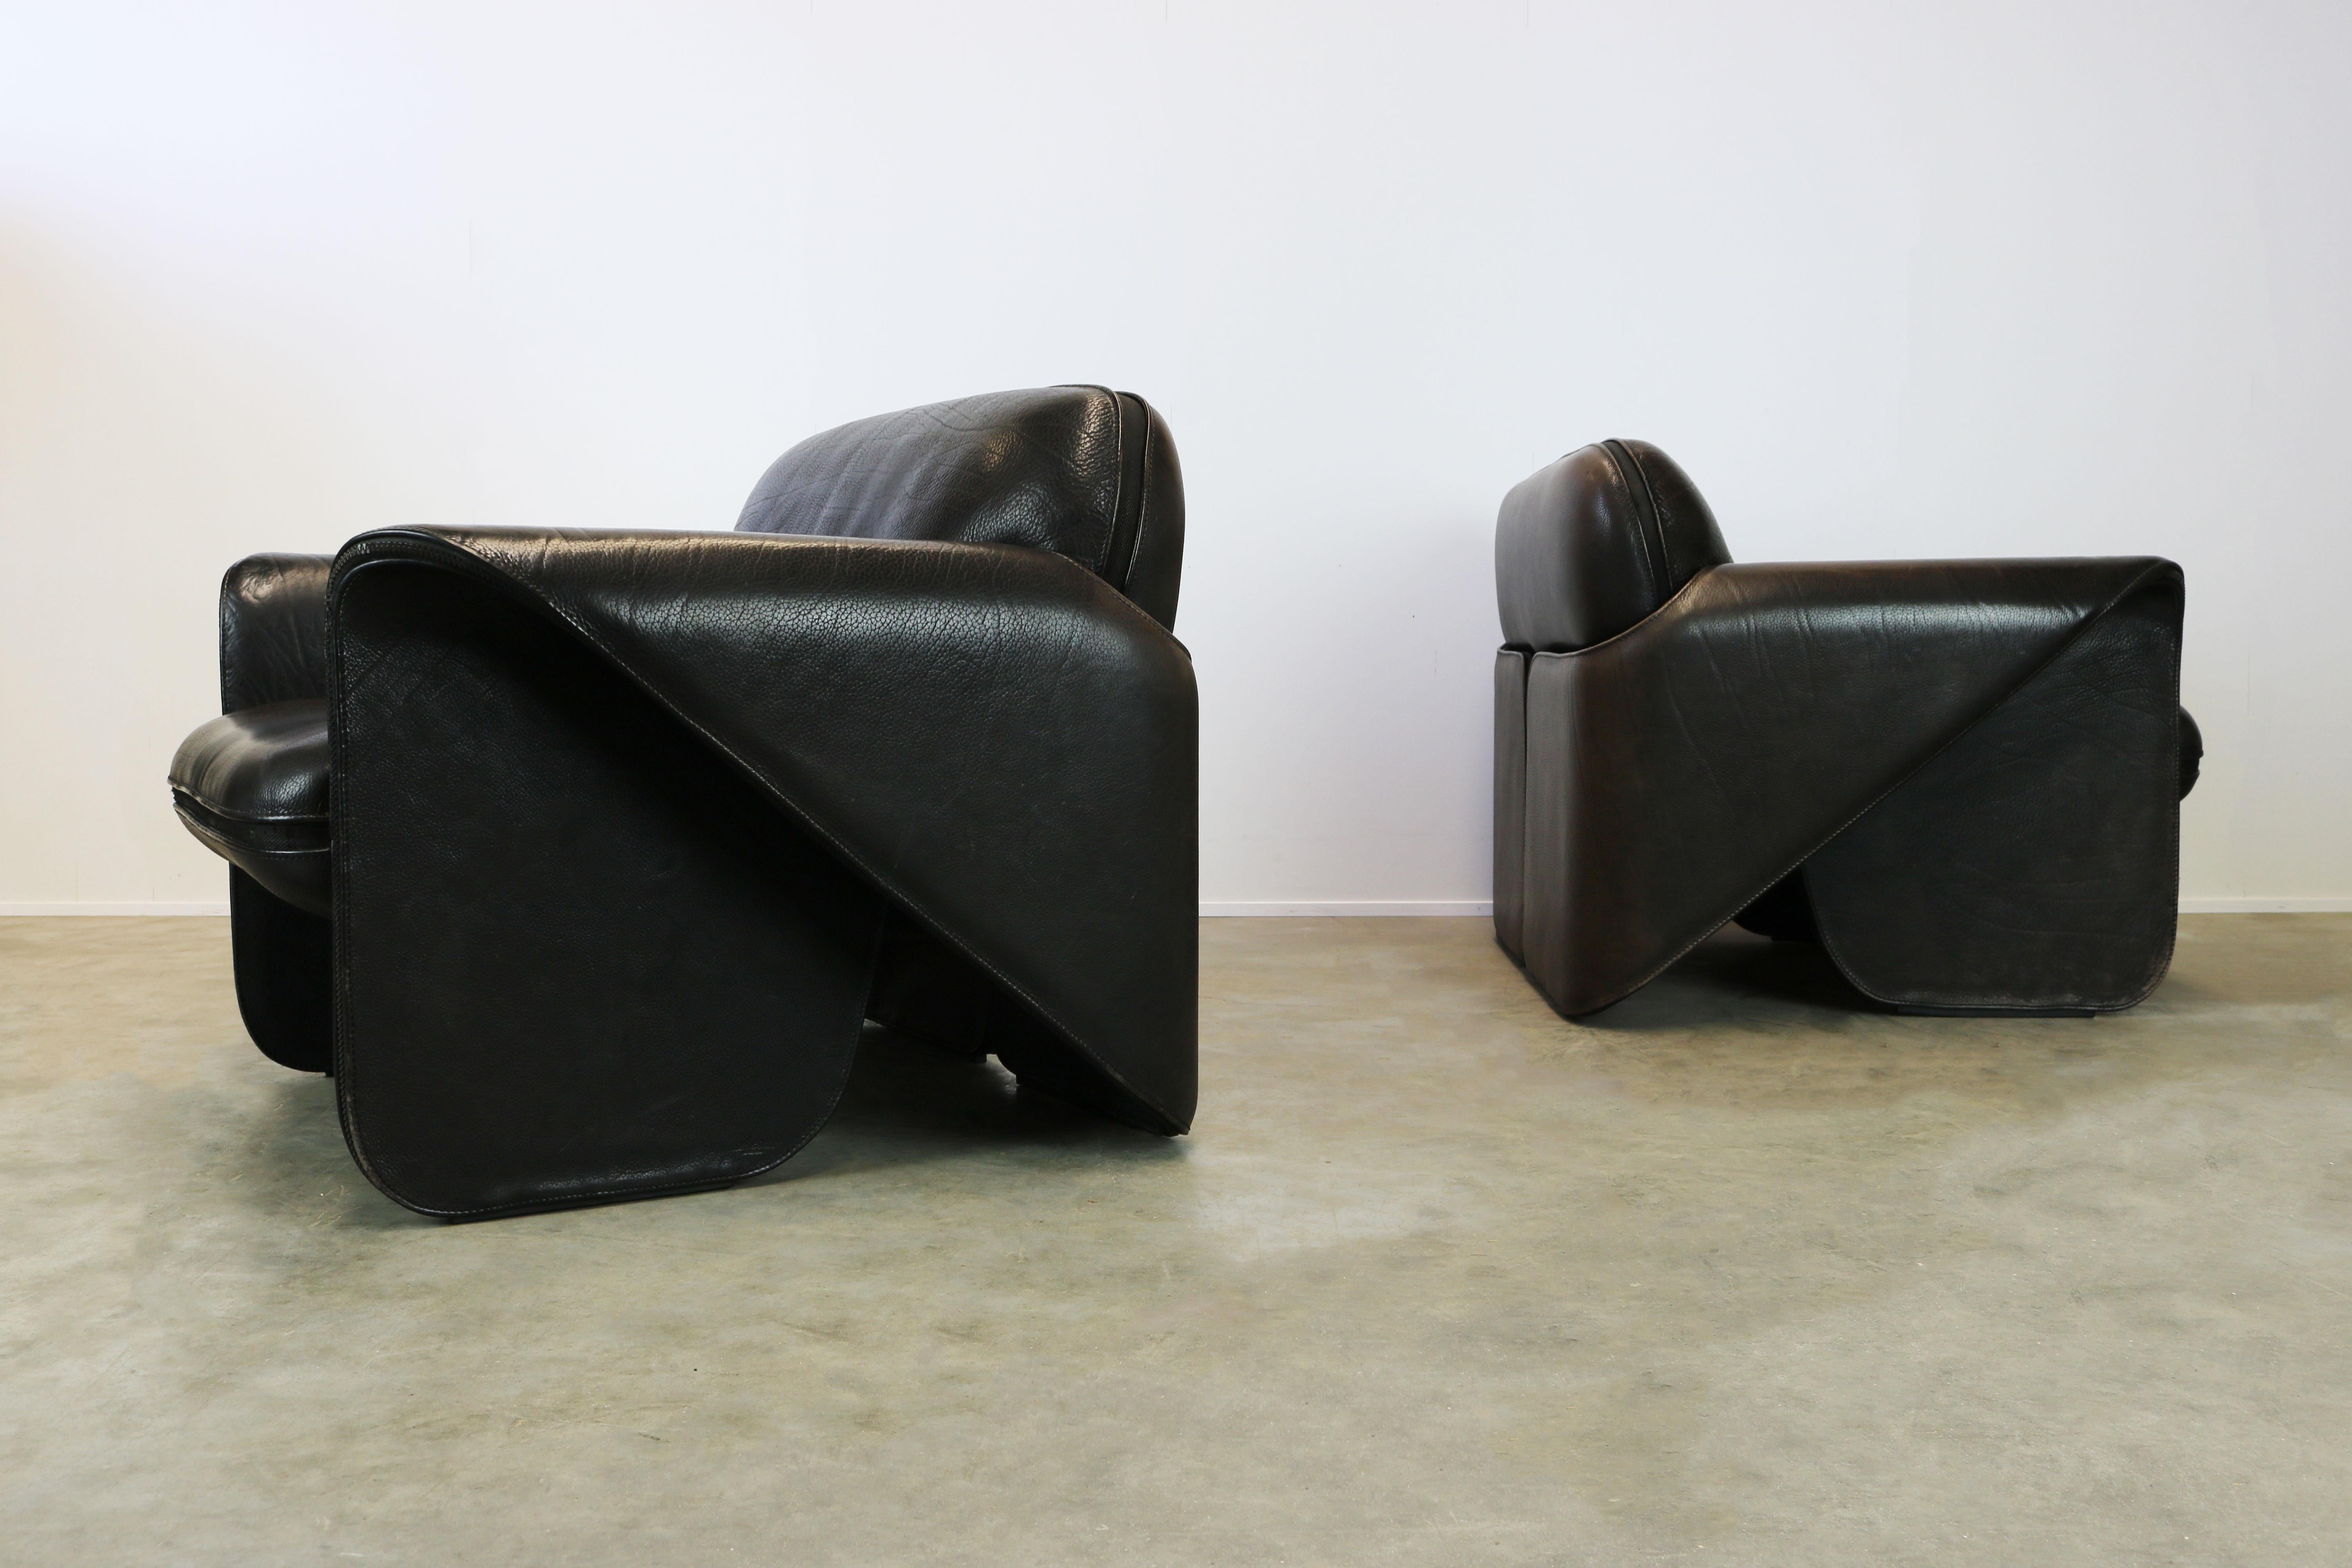 Rare Pair of Swiss De Sede Ds 125 Lounge Chairs by Gerd Lange 1978 Black Leather 13